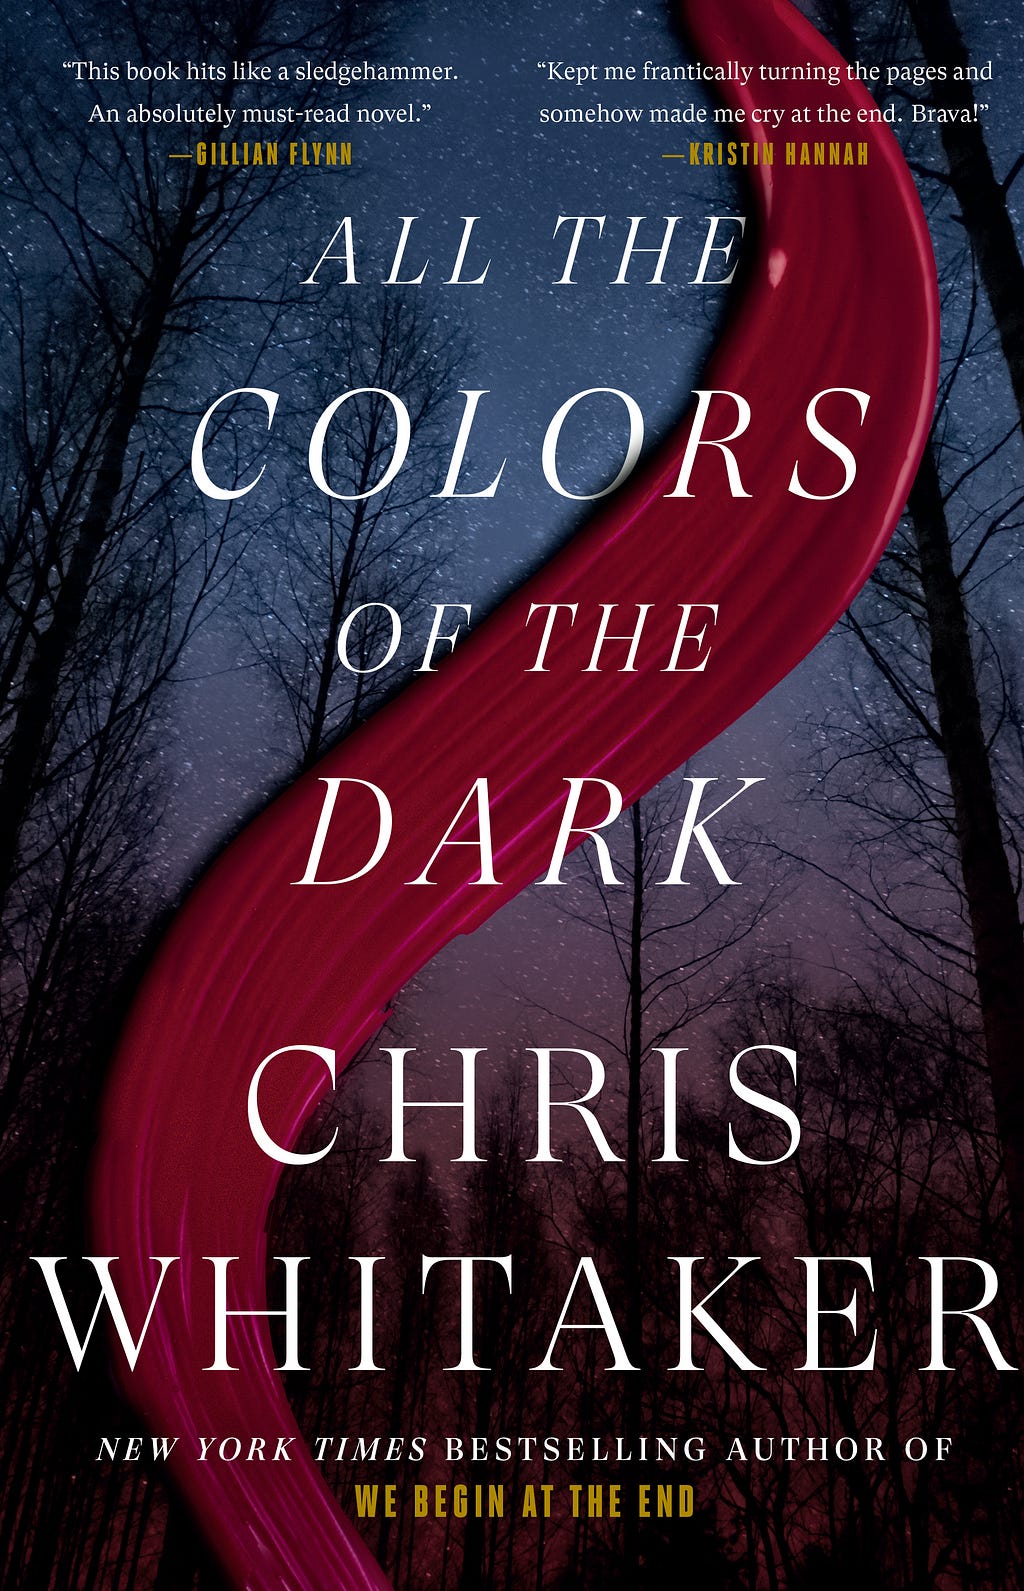 PDF All the Colors of the Dark By Chris Whitaker